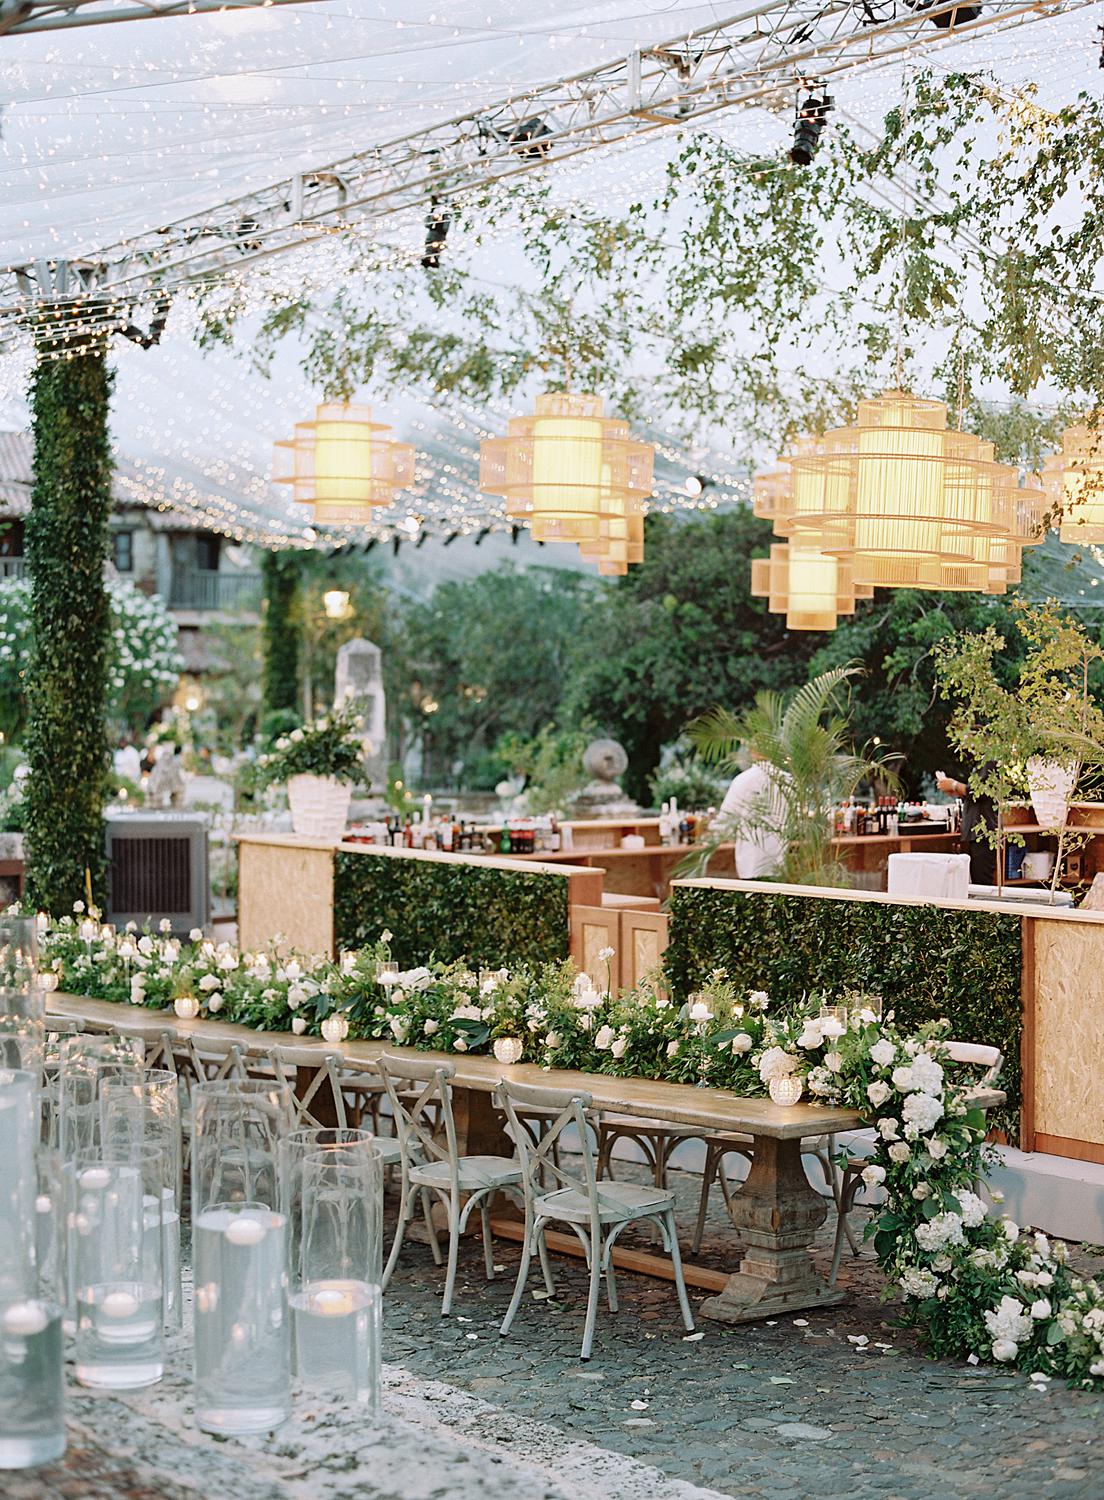 Long table with cascading florals and hanging lanterns at reception during an Altos de Chavon wedding.